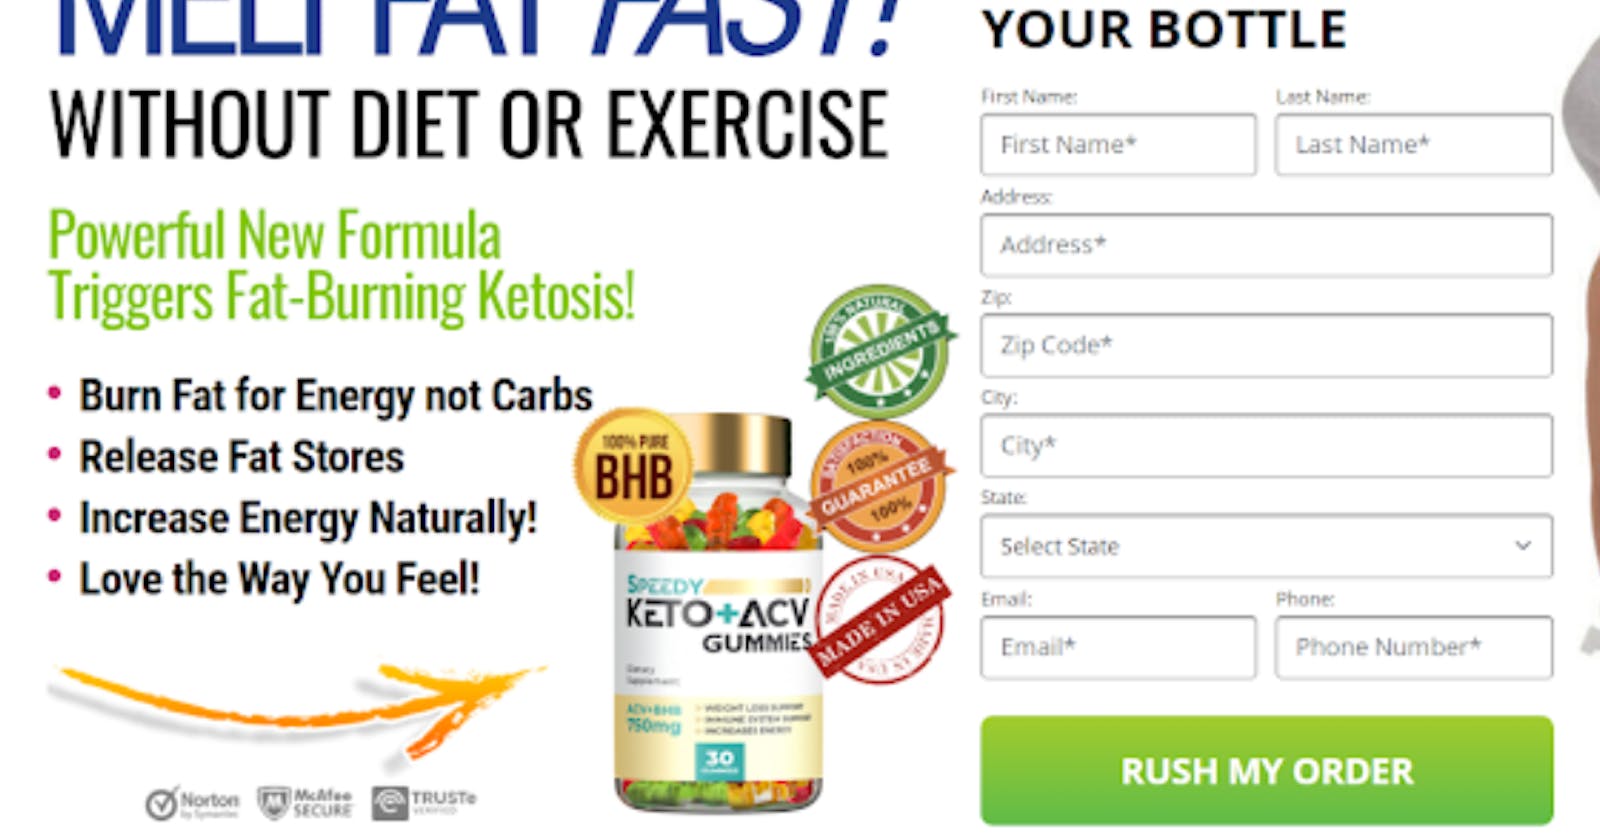 Speedy Keto ACV Gummies Reviews – Benefits, Weight Loss and Works?